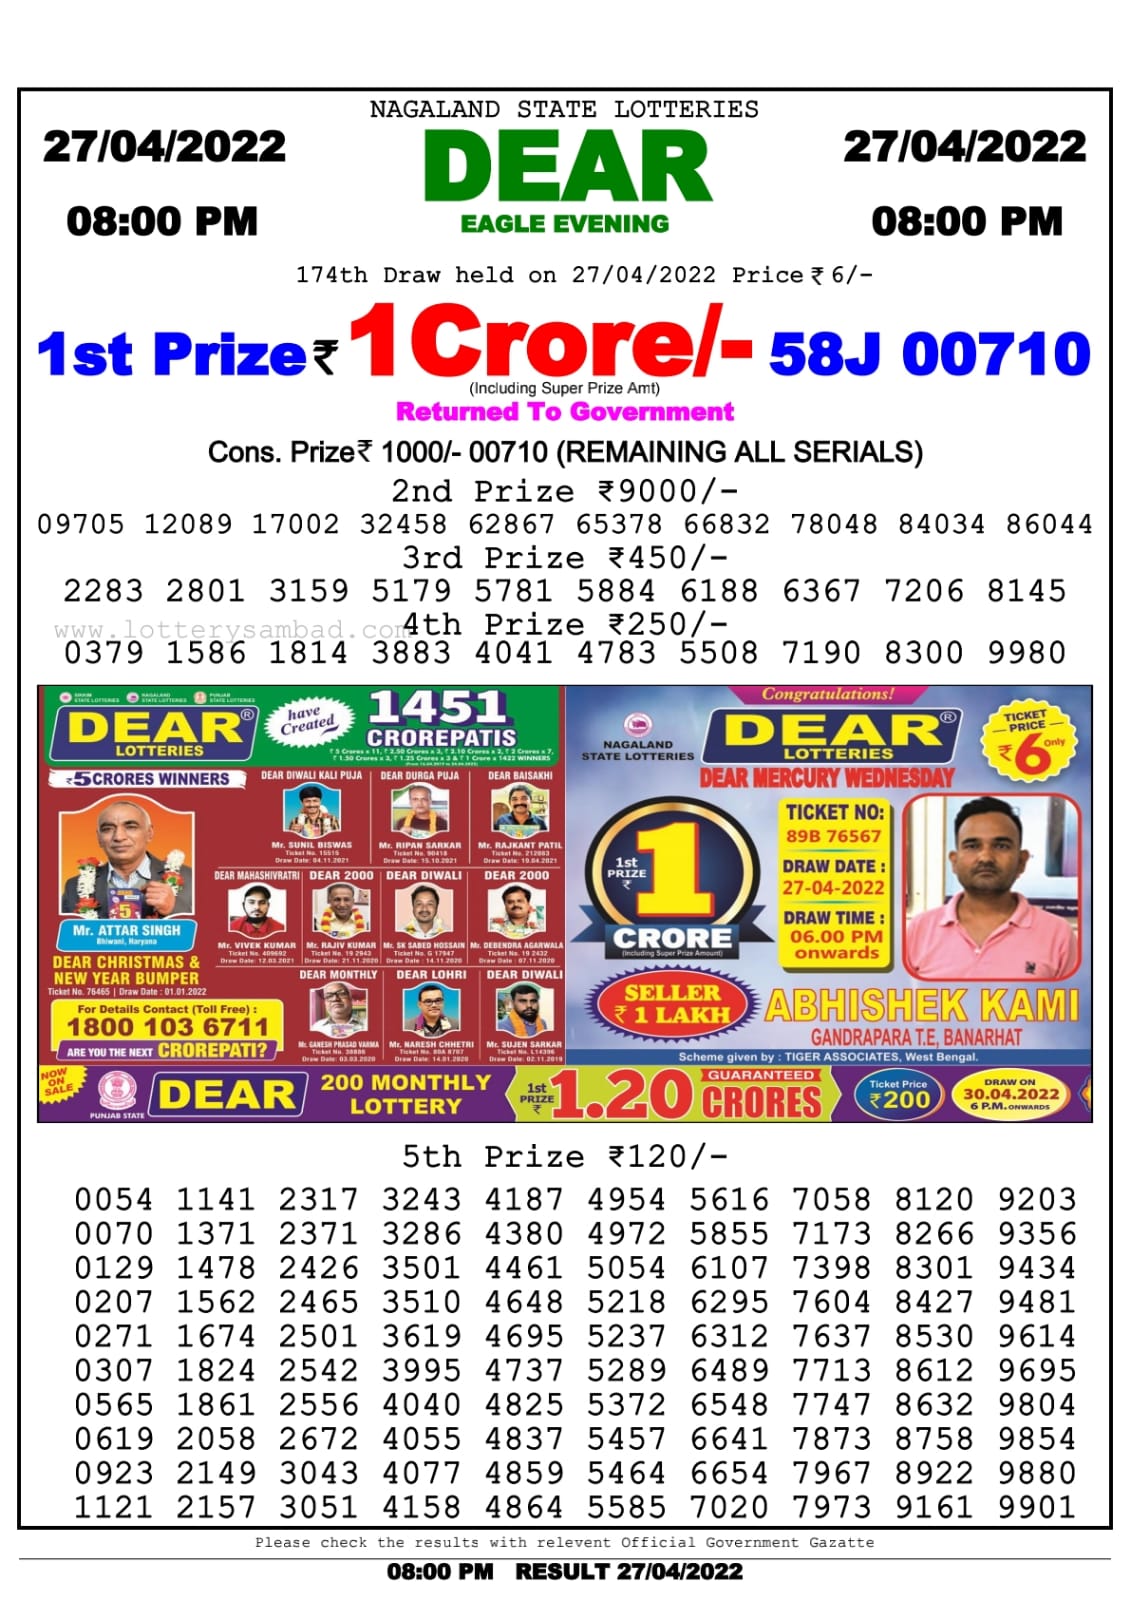 Dear Lottery Nagaland state Lottery Results 06.00 pm 27.04.2022